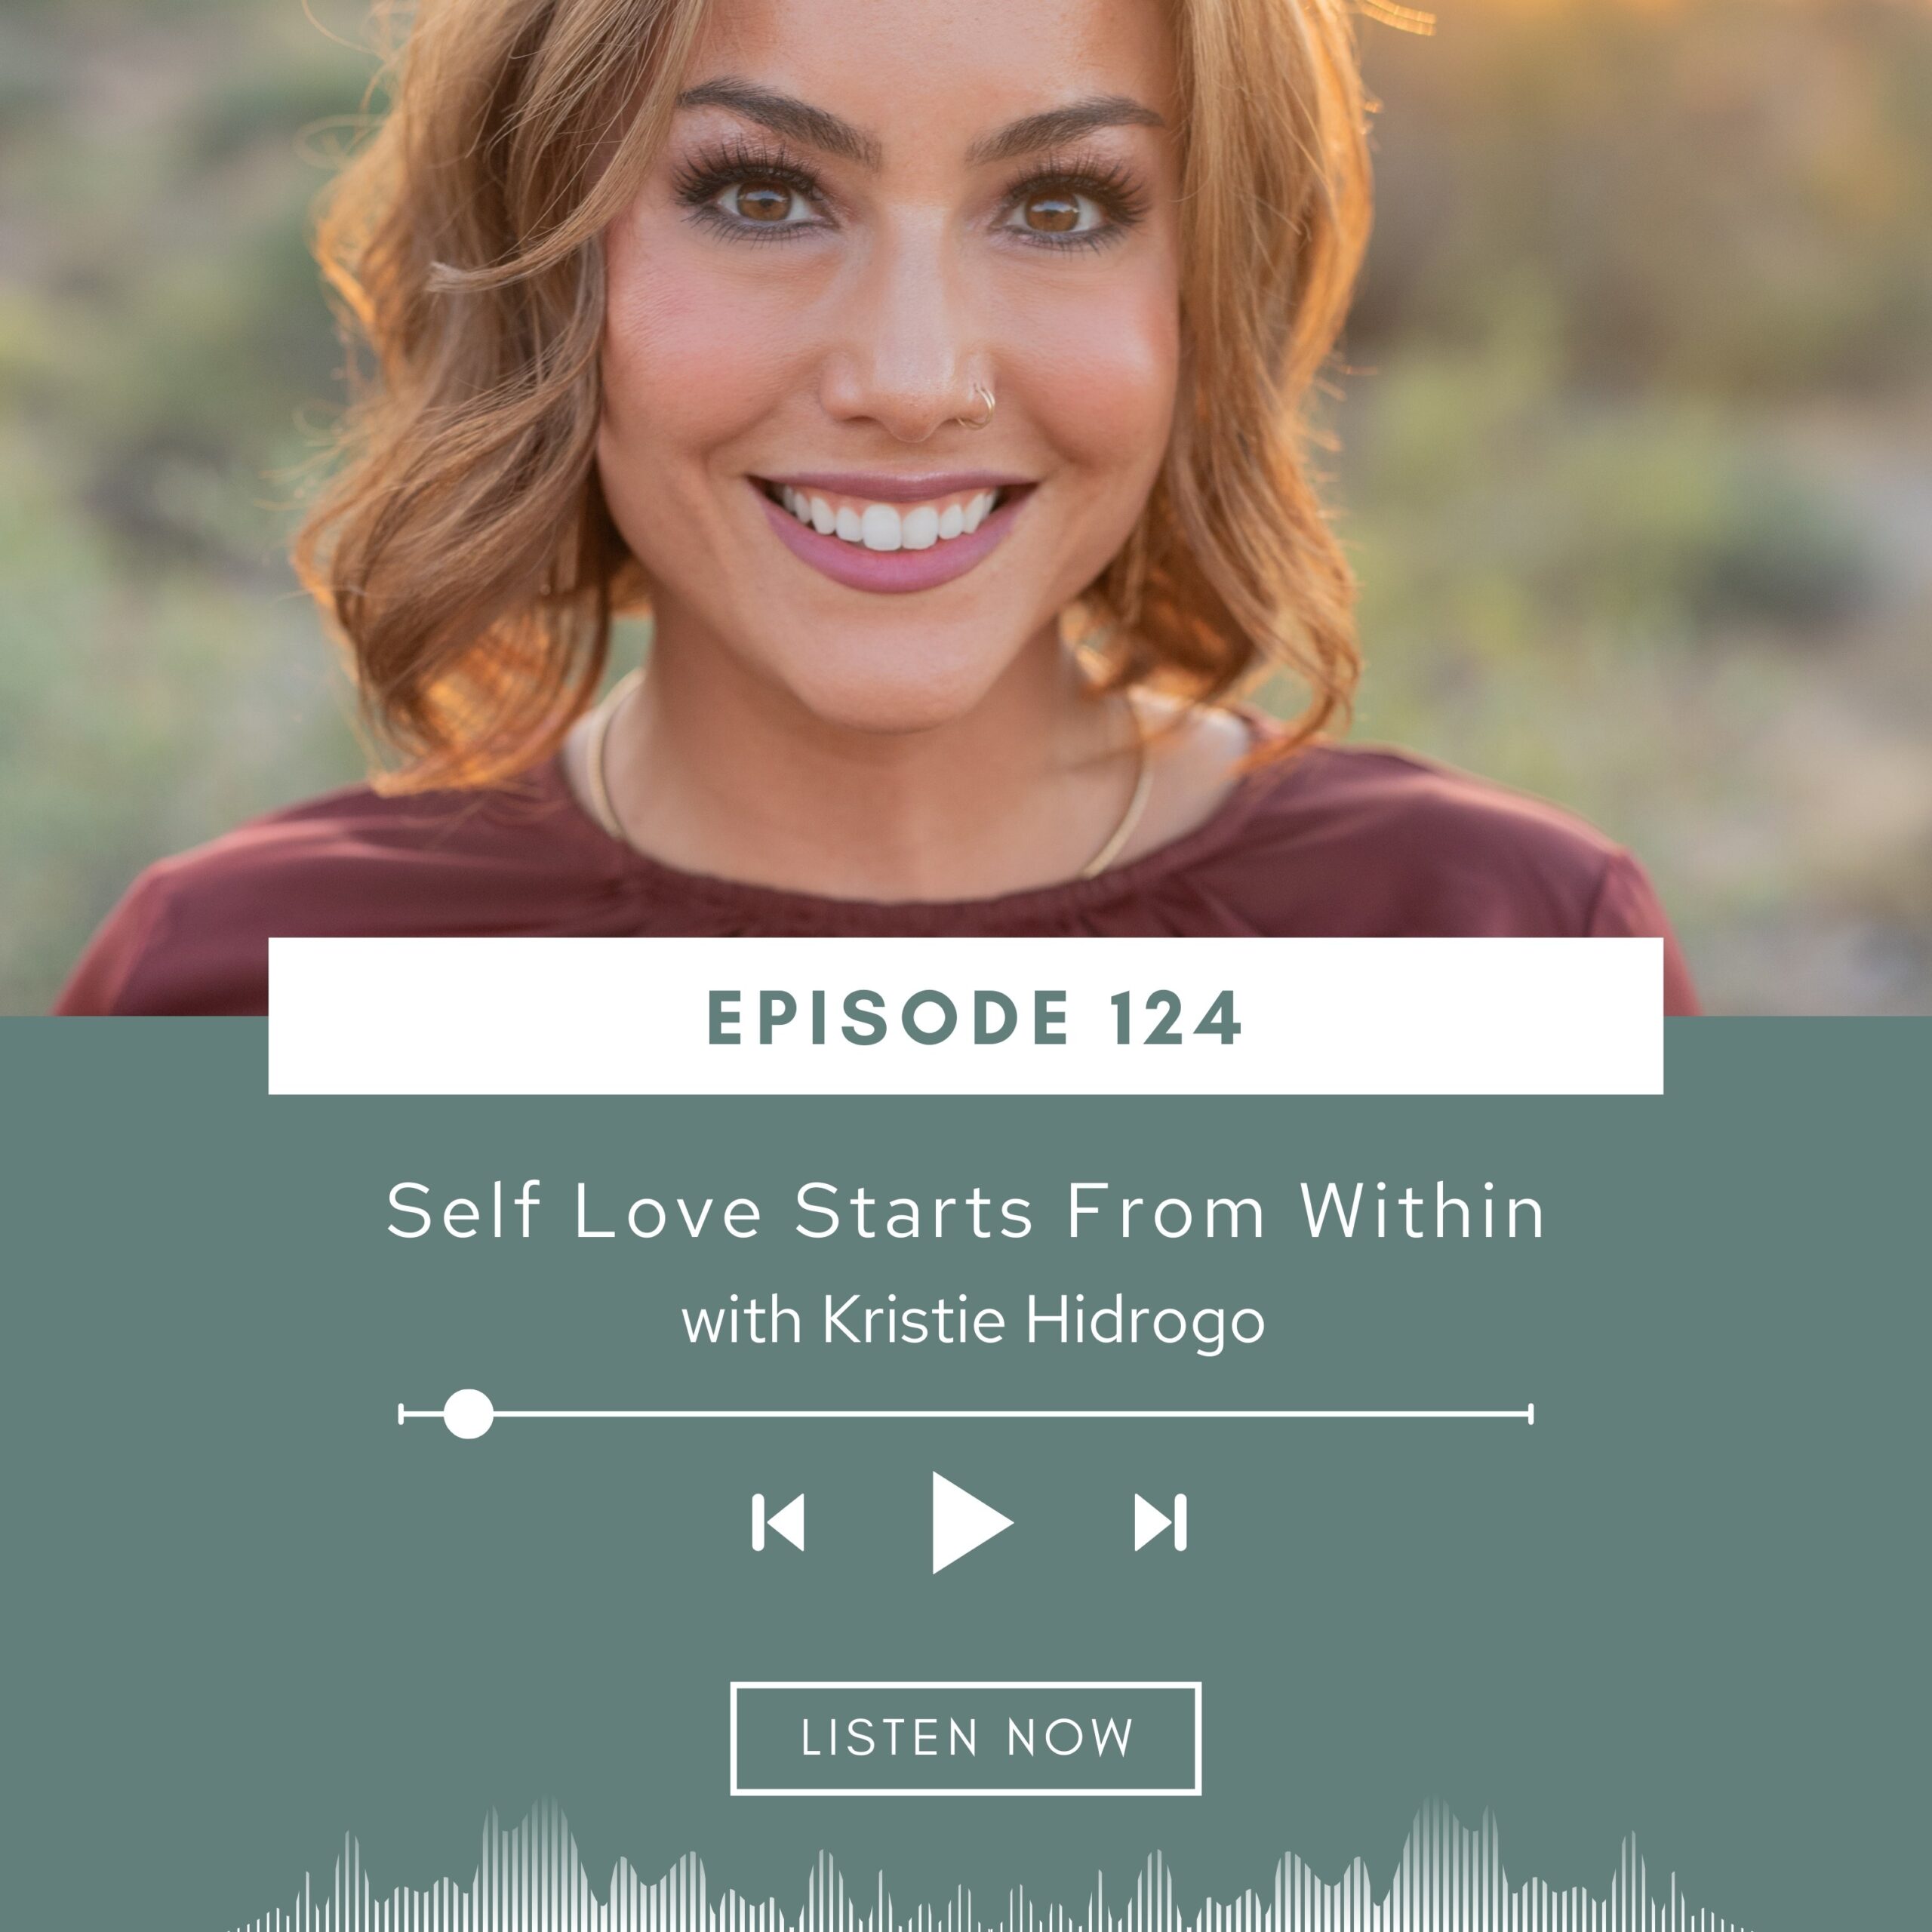 Self Love Starts From Within with Kristie Hidrogo and Quianna Marie